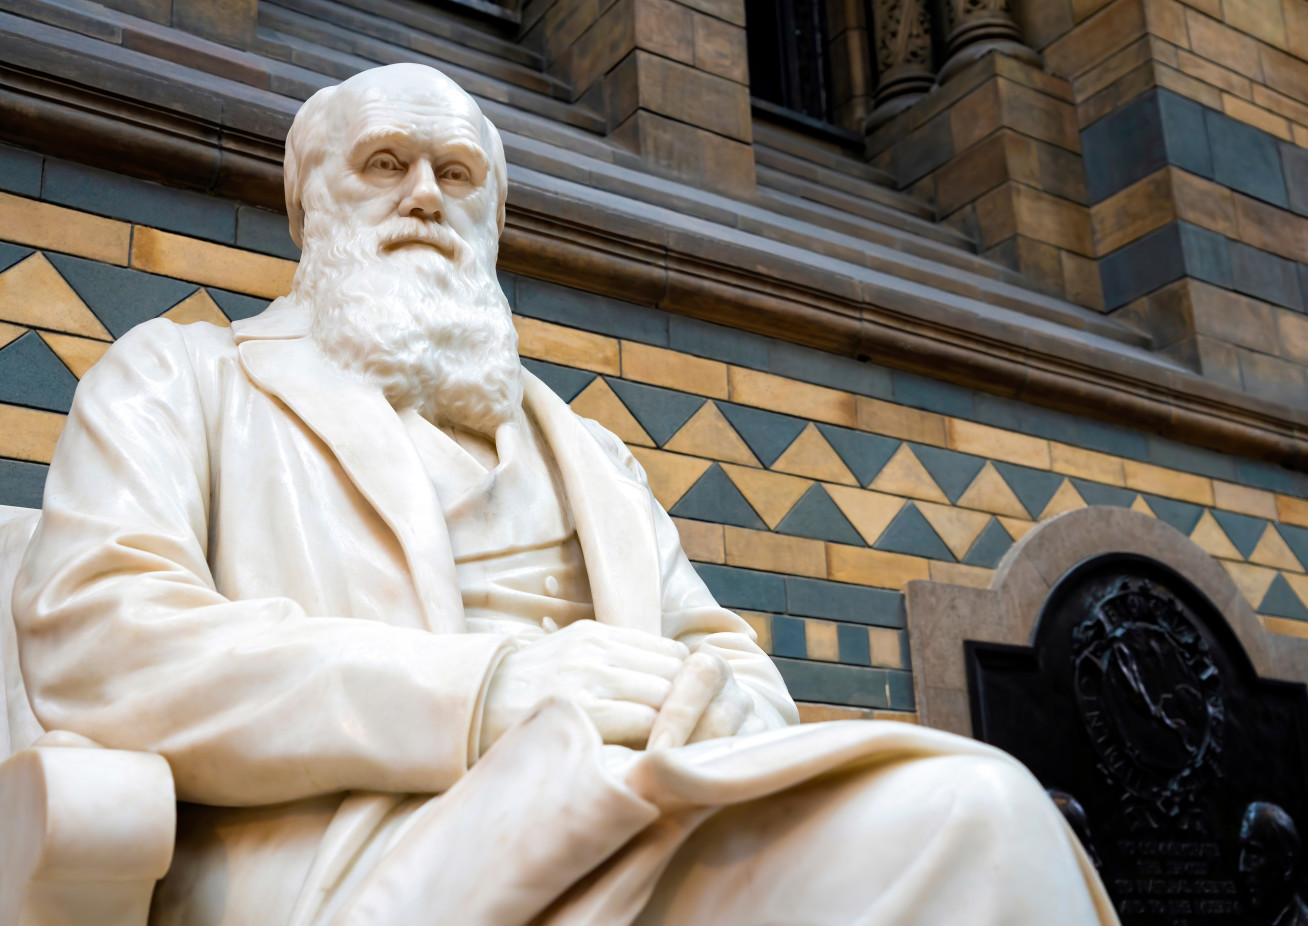 A statue of Charles Darwin.